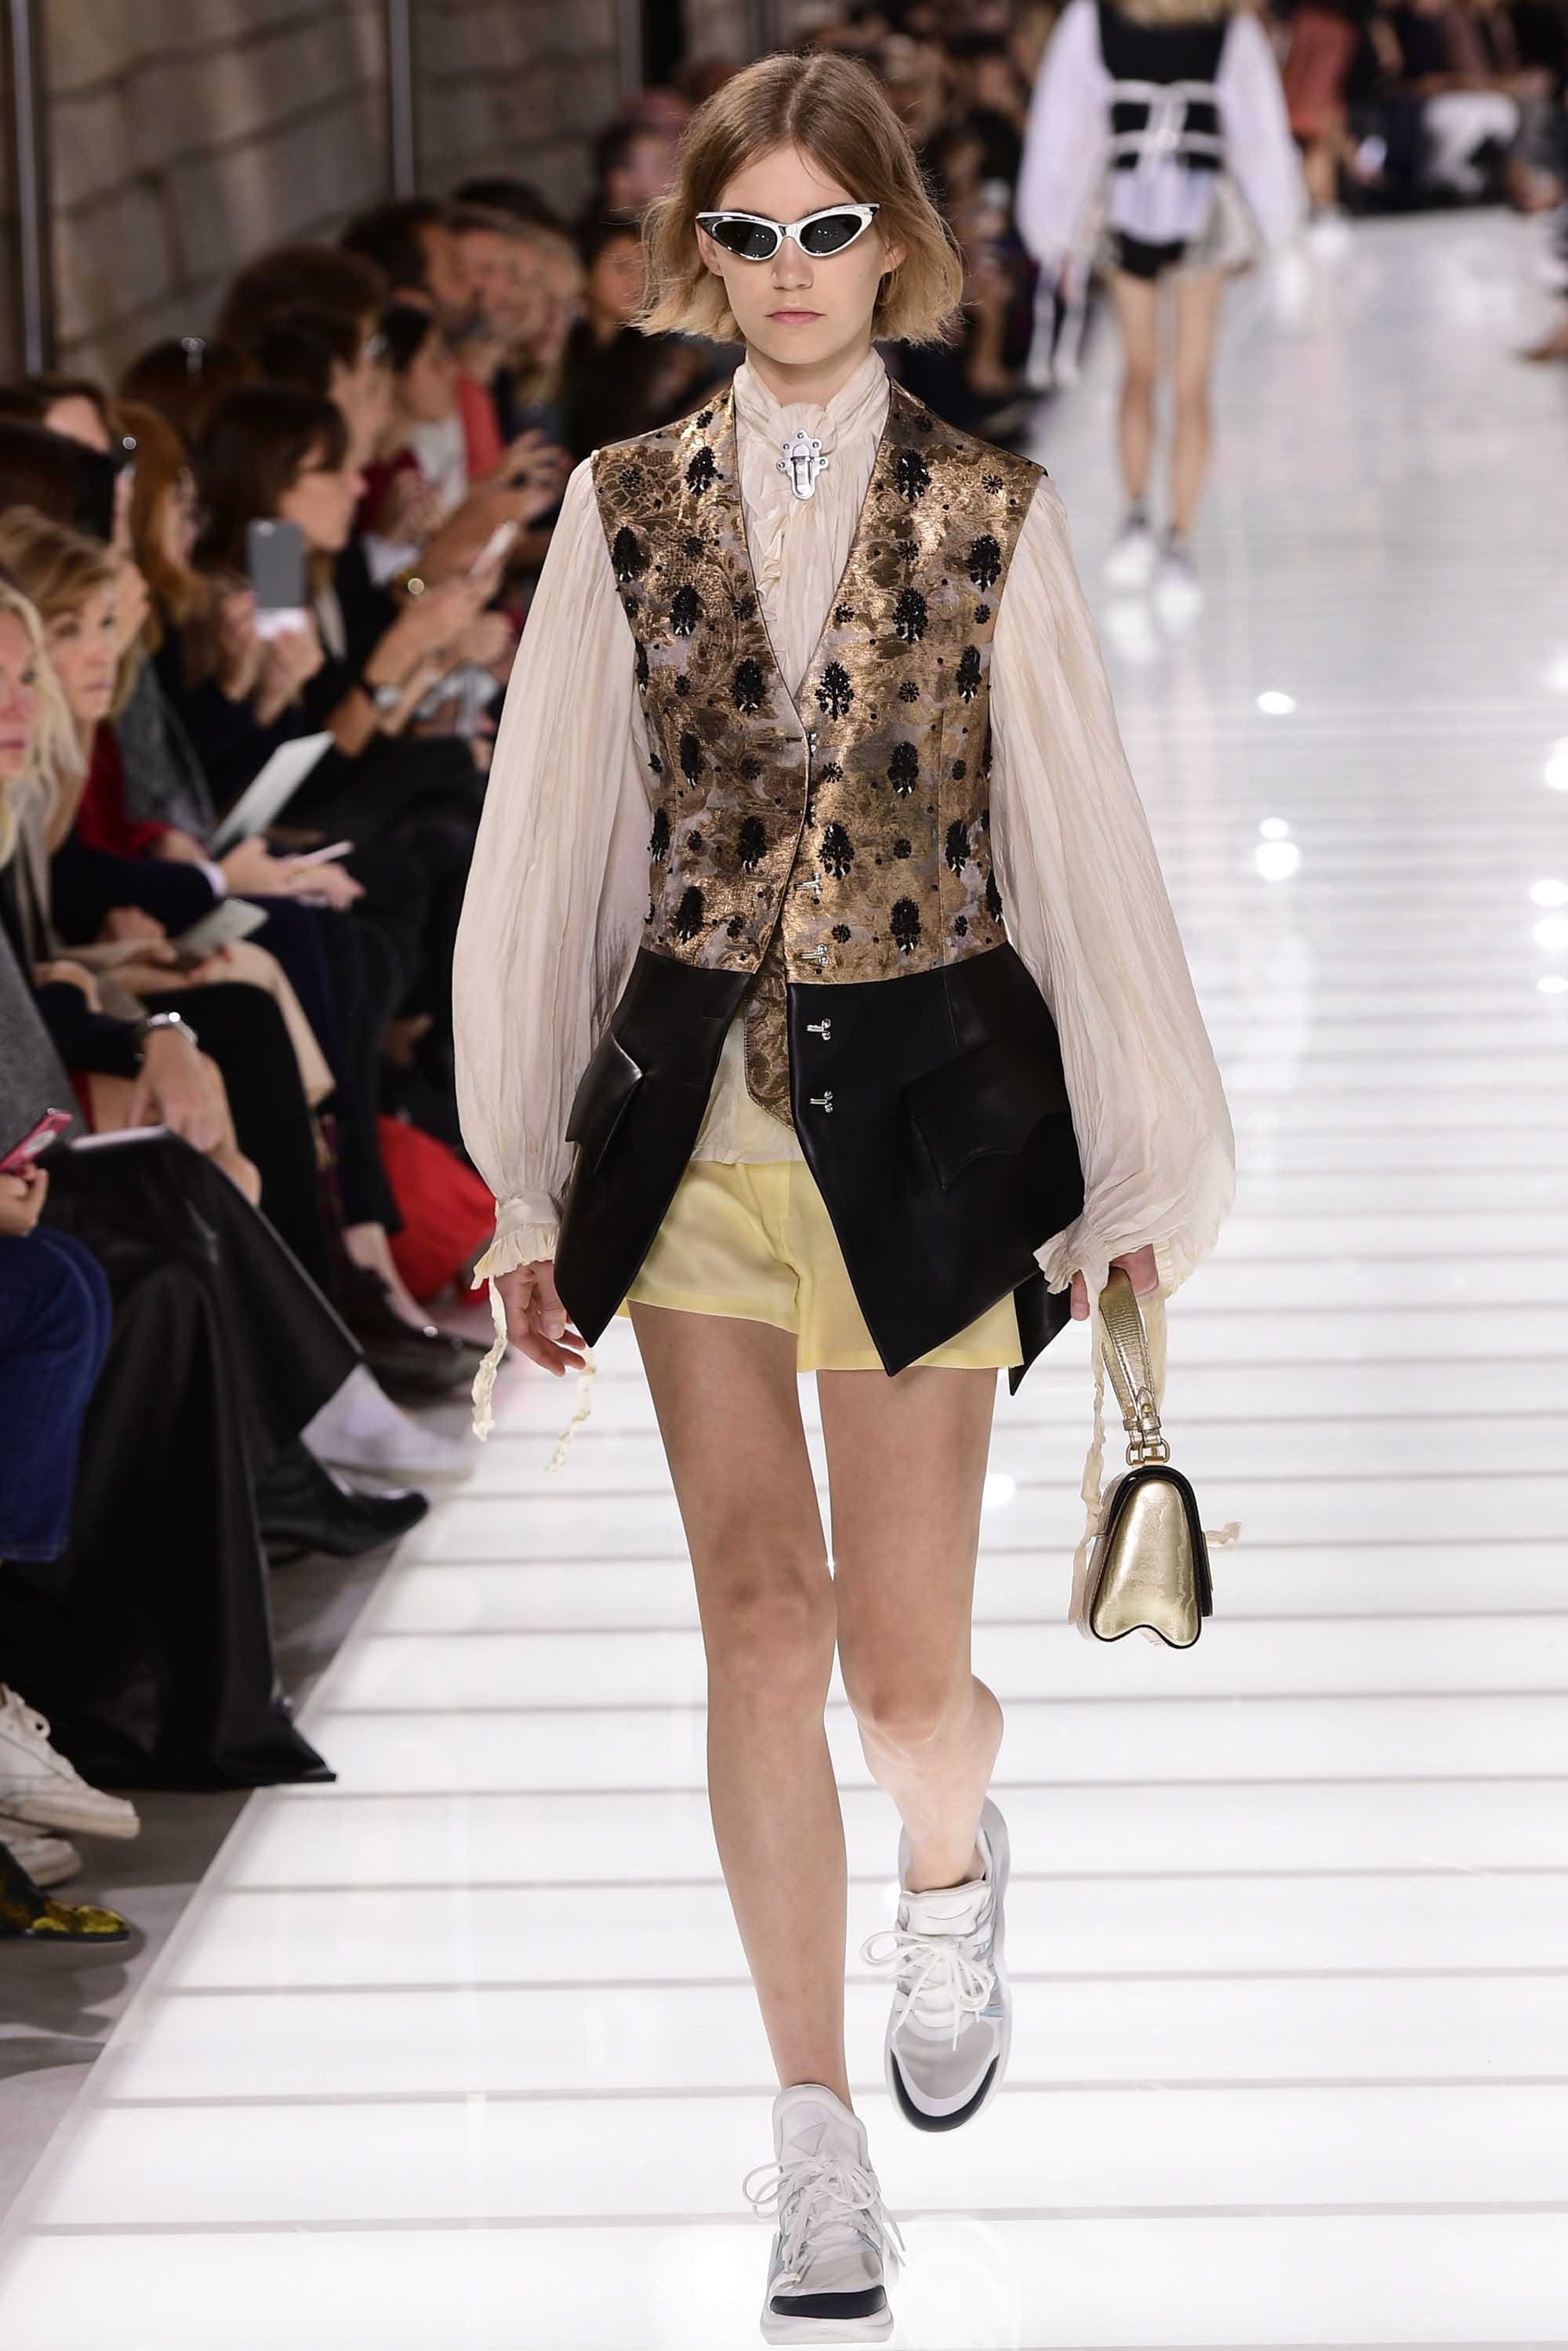 Model Erika Linder walks on the runway during the Louis Vuitton